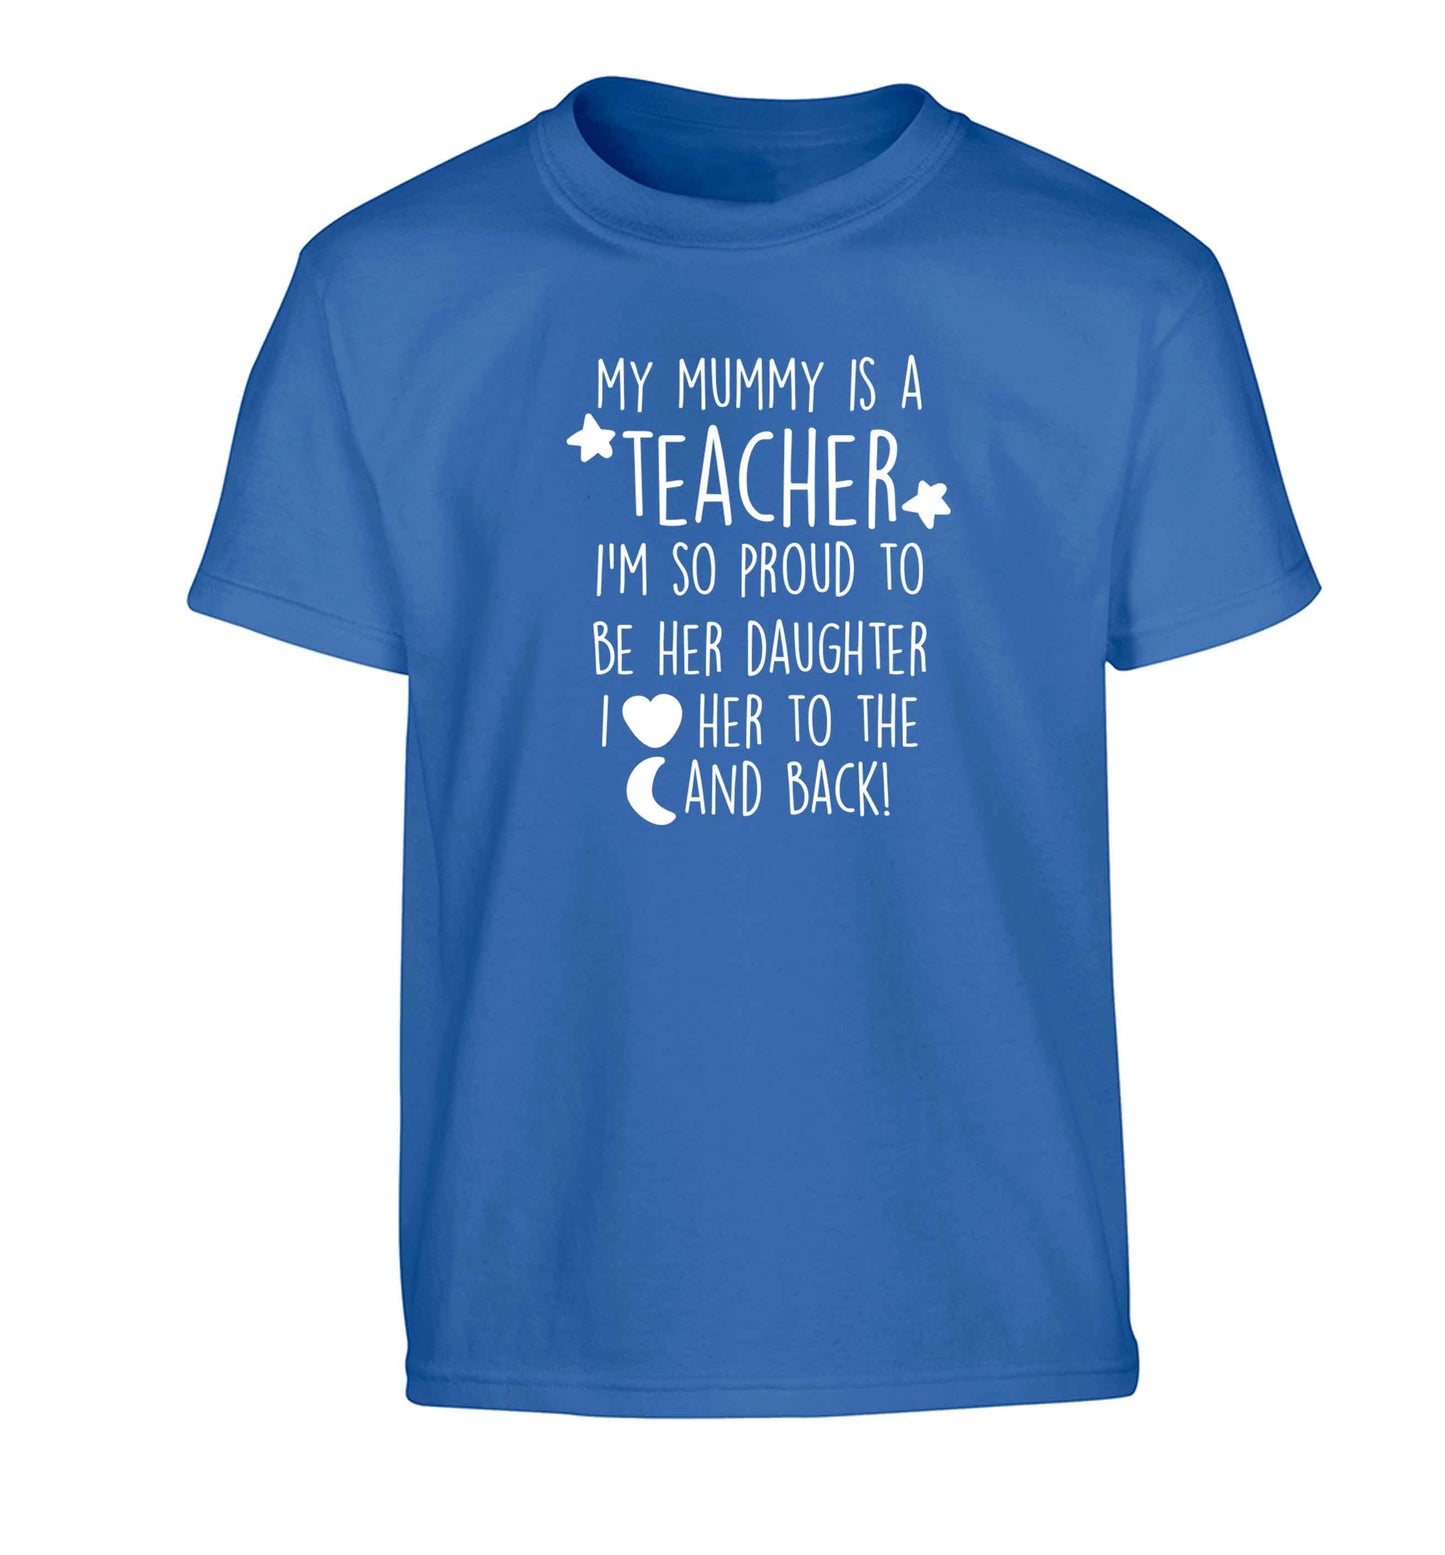 My mummy is a teacher I'm so proud to be her daughter I love her to the moon and back Children's blue Tshirt 12-13 Years